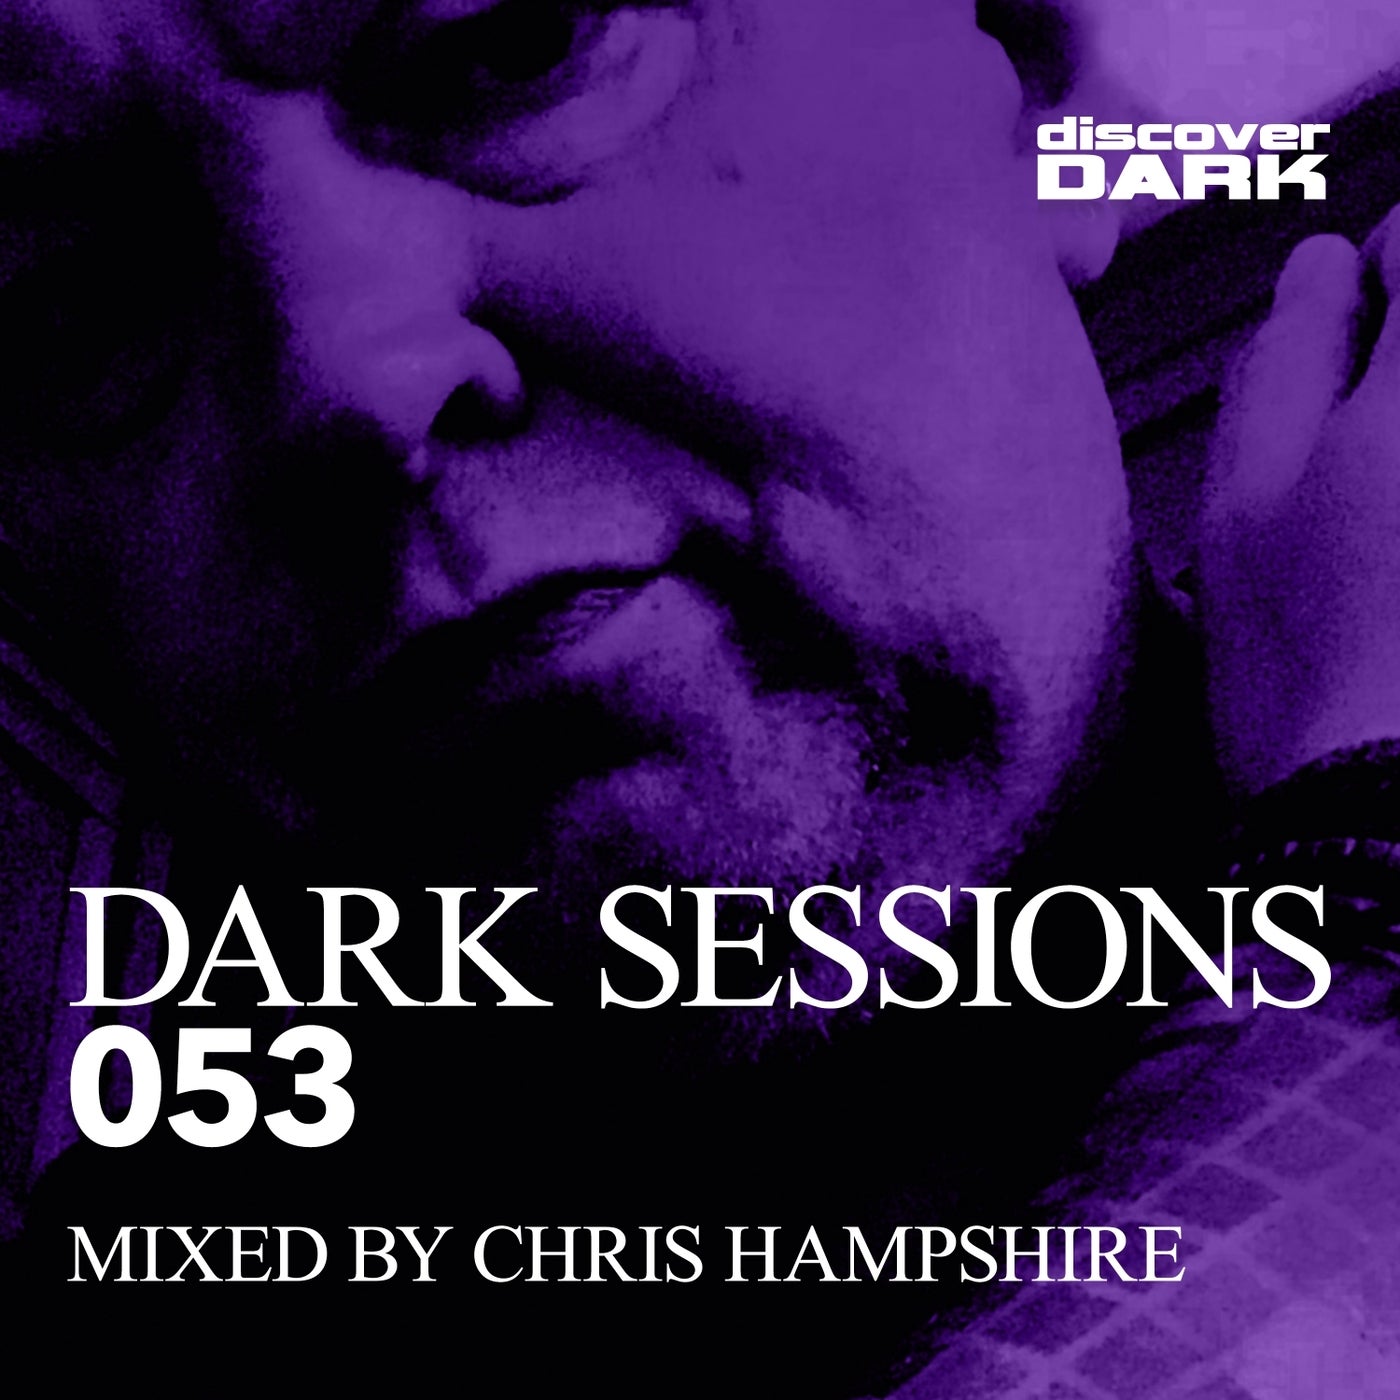 Dark Sessions 053 (Mixed by Chris Hampshire)